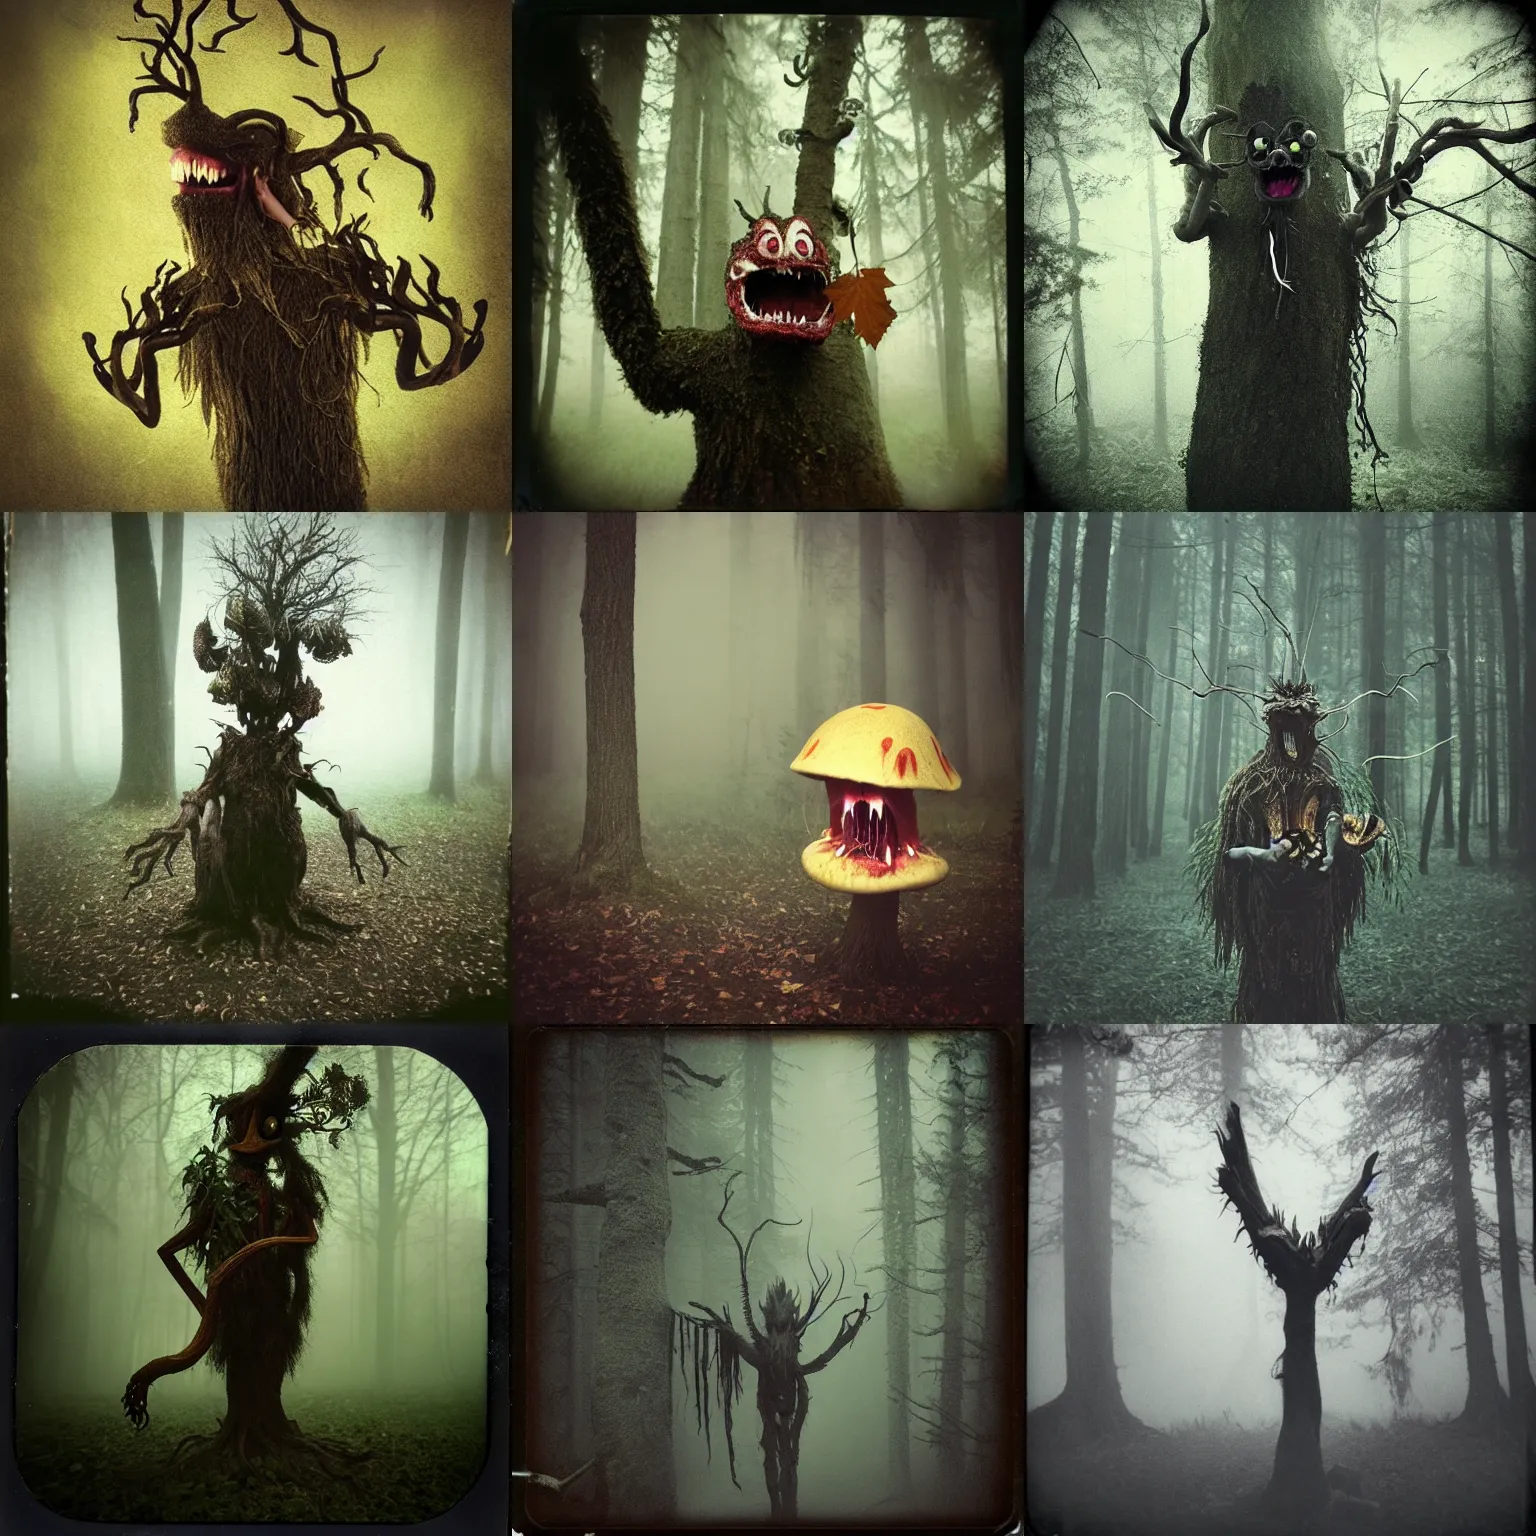 Prompt: anthropomorphic tree creature eating mushrooms, open mouth with fangs, long spindly branches, dark fantasy horror, ominous, disturbing, foggy, eerie mist, low quality instant camera photo